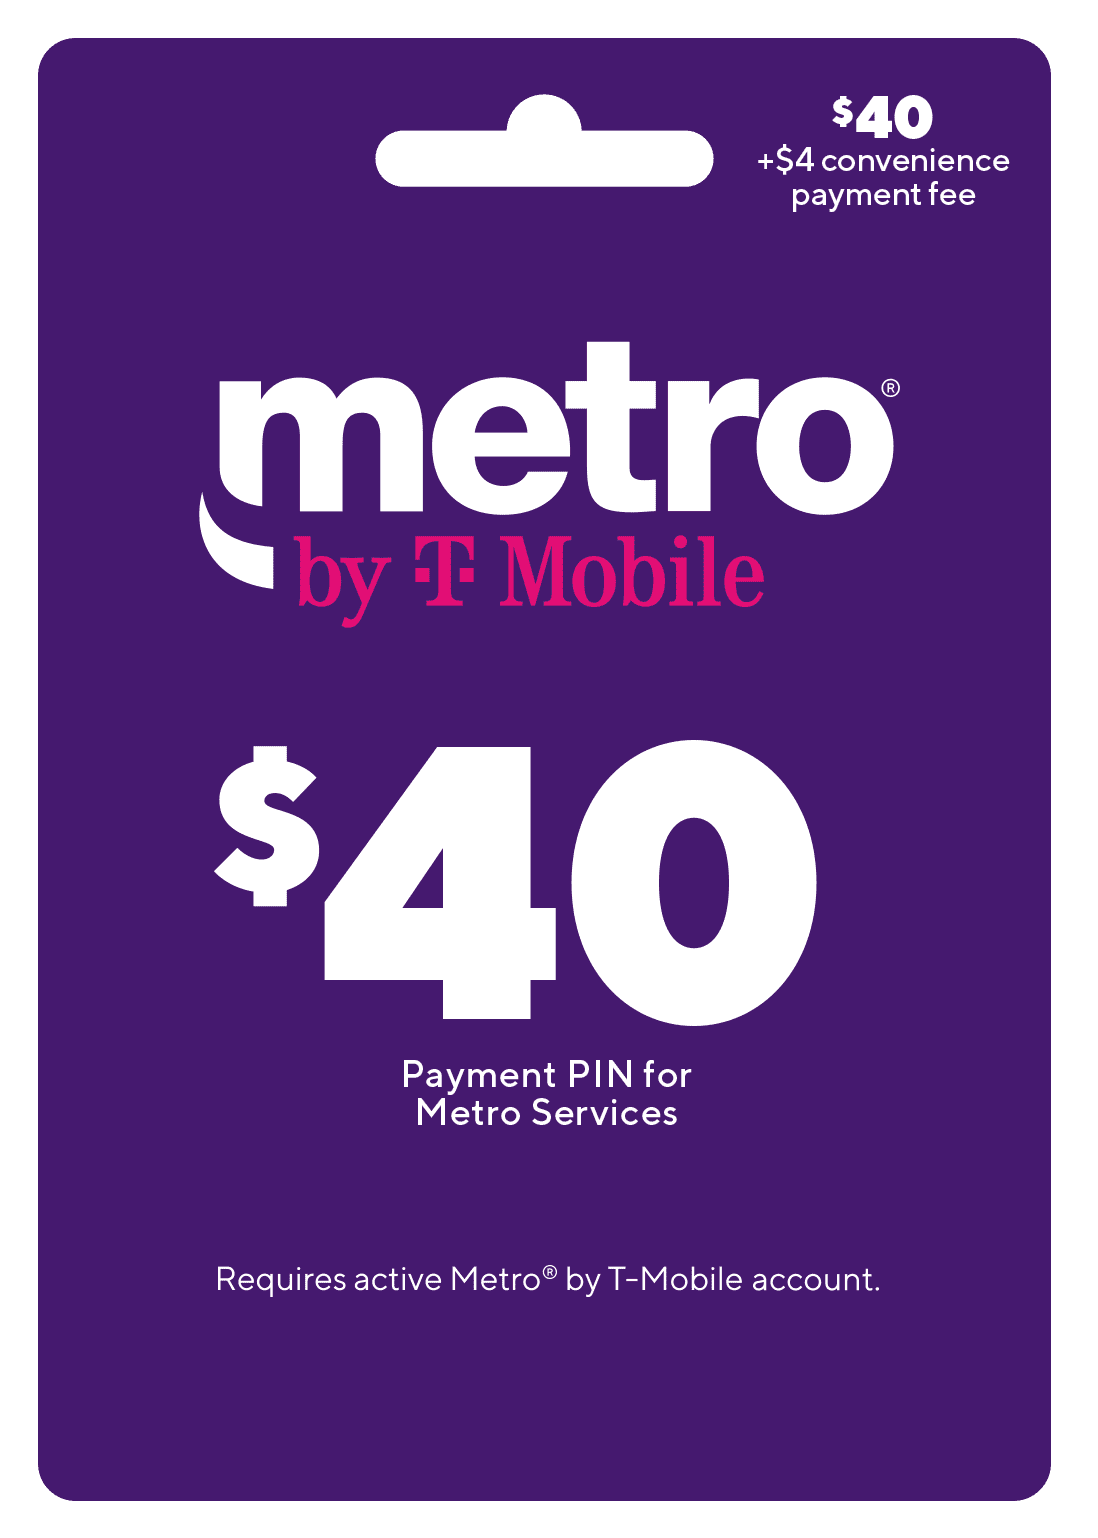 metro-by-t-mobile-40-payment-pin-w-4-convenience-fee-email-delivery